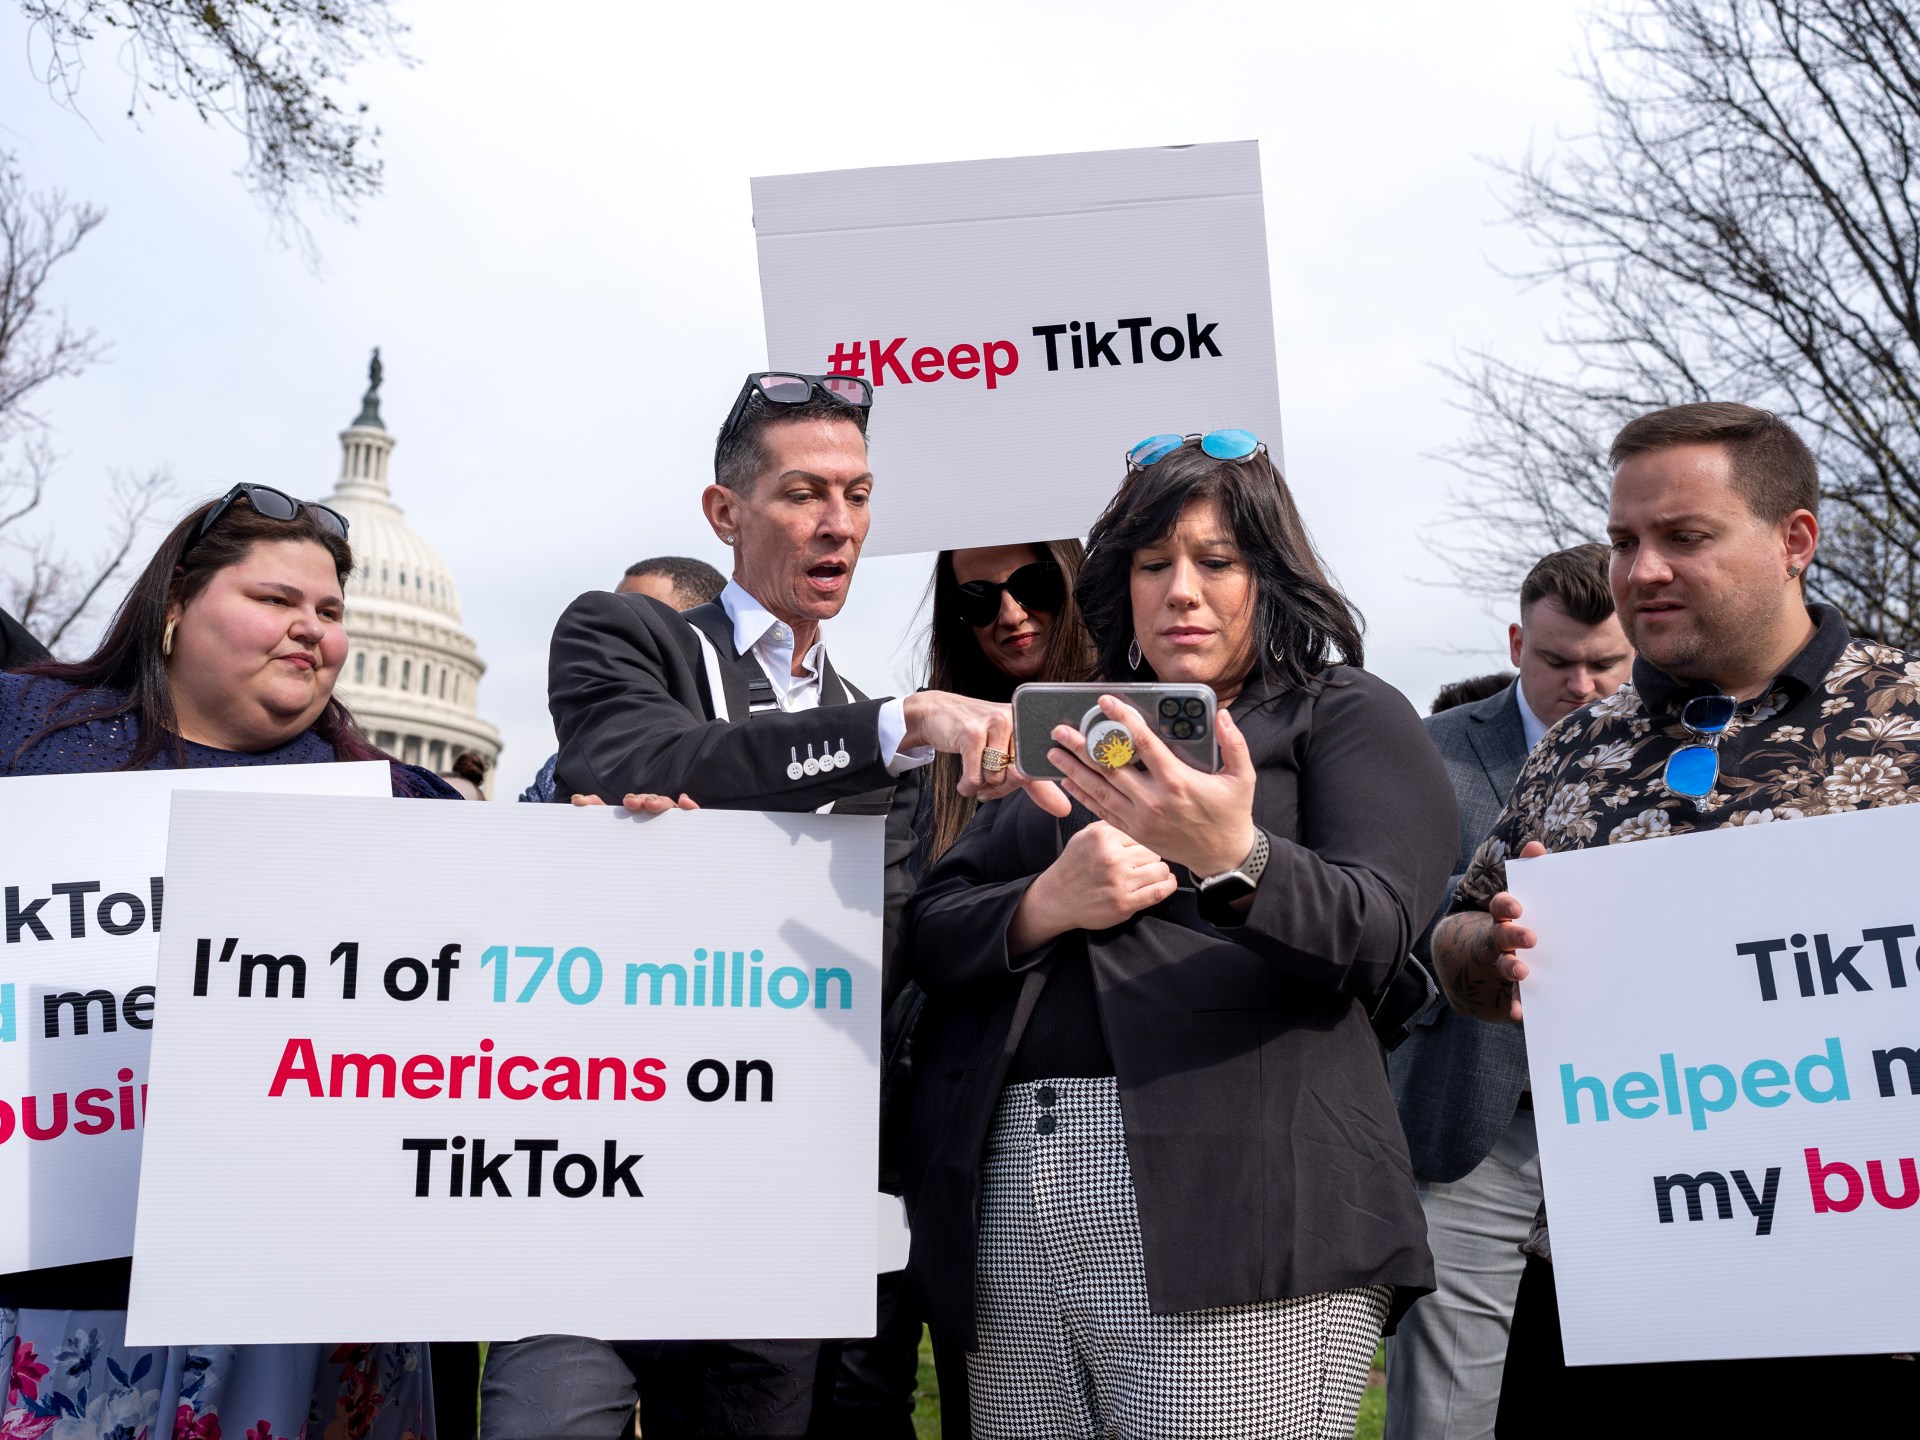 US House passes bill that would ban TikTok amid national security concerns